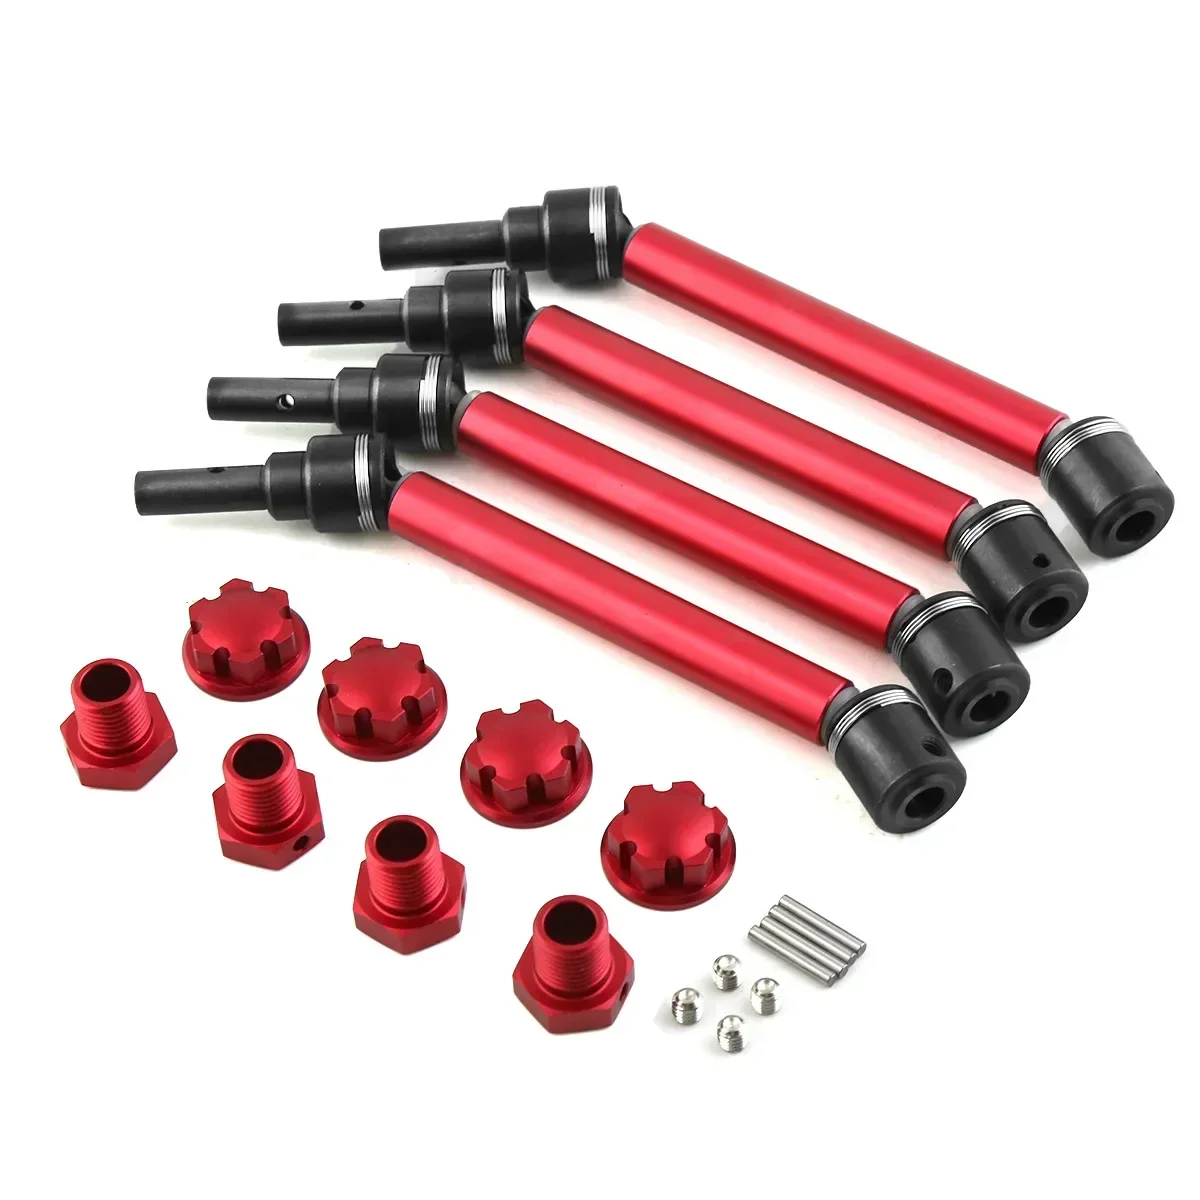 

GGRC KKRC 4pcs 8996X Extended Drive Shaft CVD with Wheel Hex for 1/10 Traxxas MAXX 2.0 V2 89076-4 WideMaxx RC Car Upgrade Parts